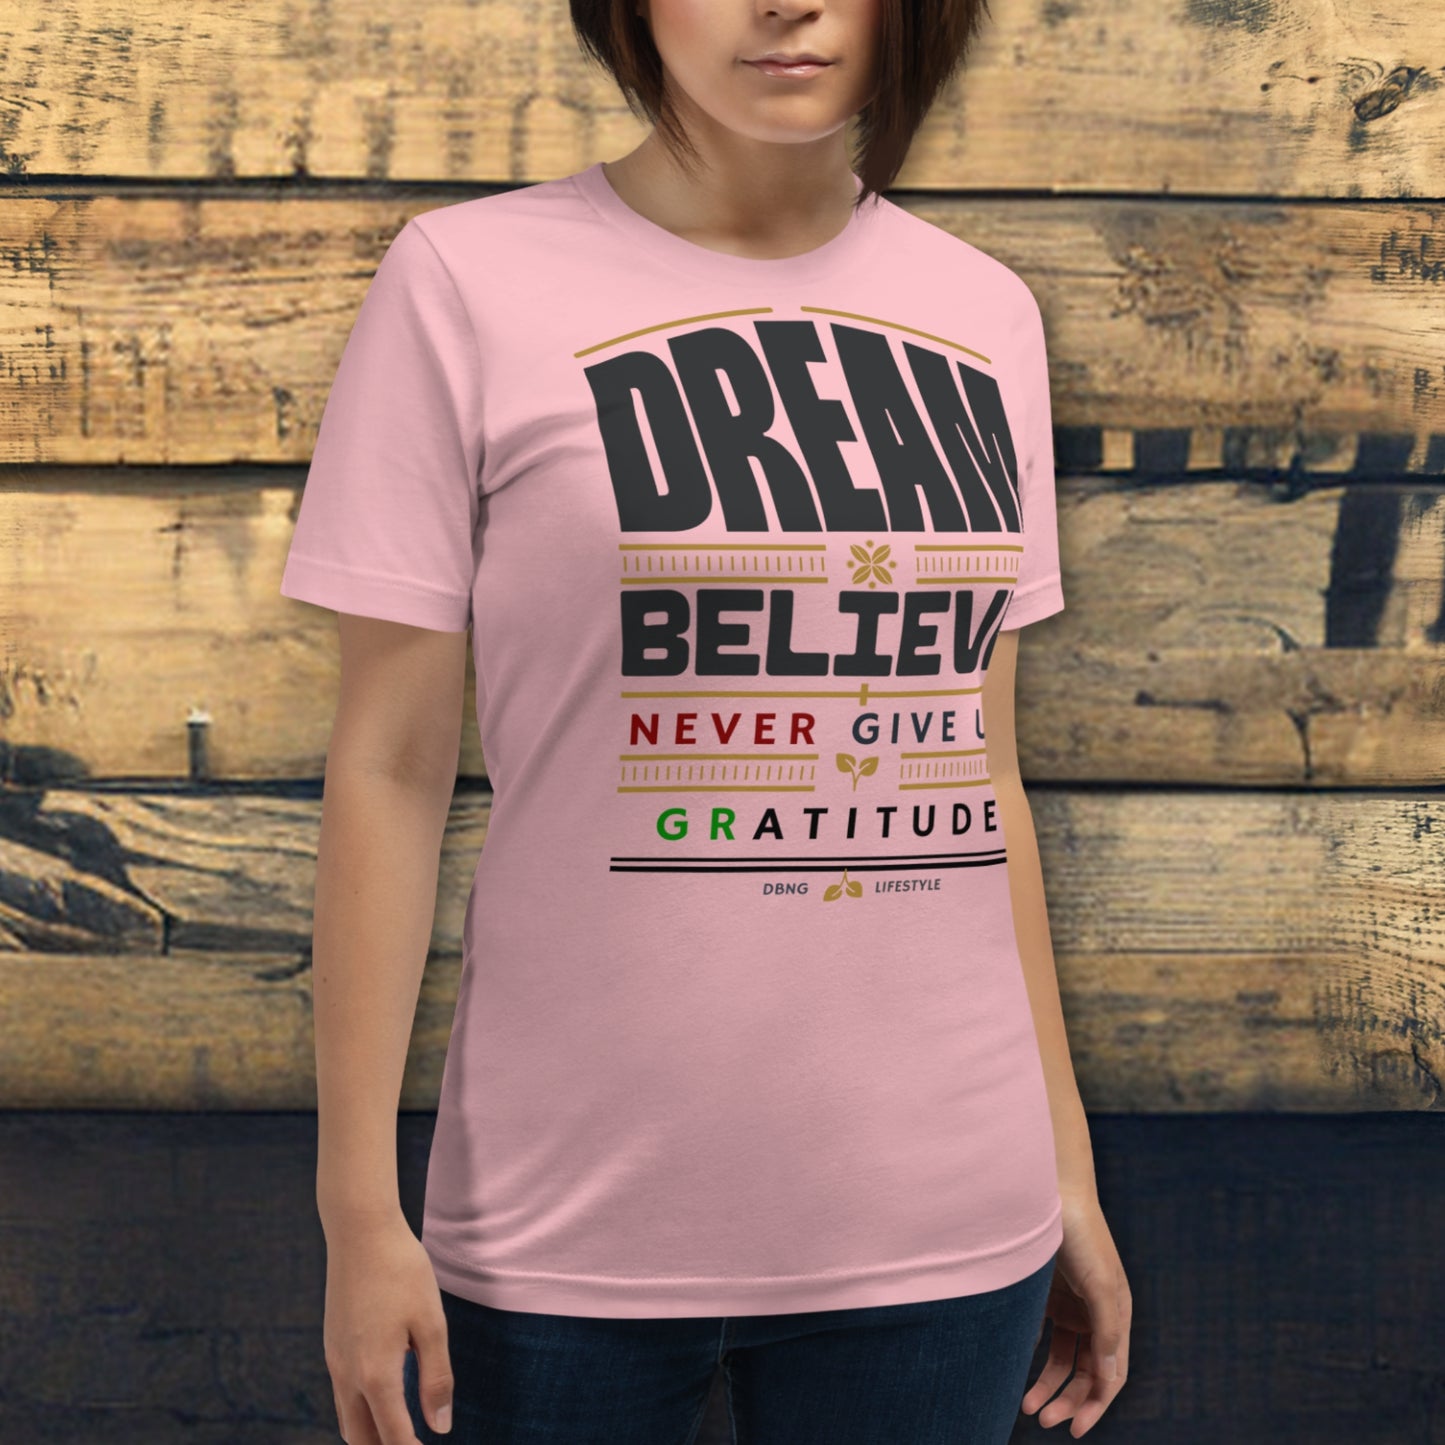 Motivational Quote Shirt - Dream, Believe, Never Give Up, Gratitude - DBNG Lifestyle